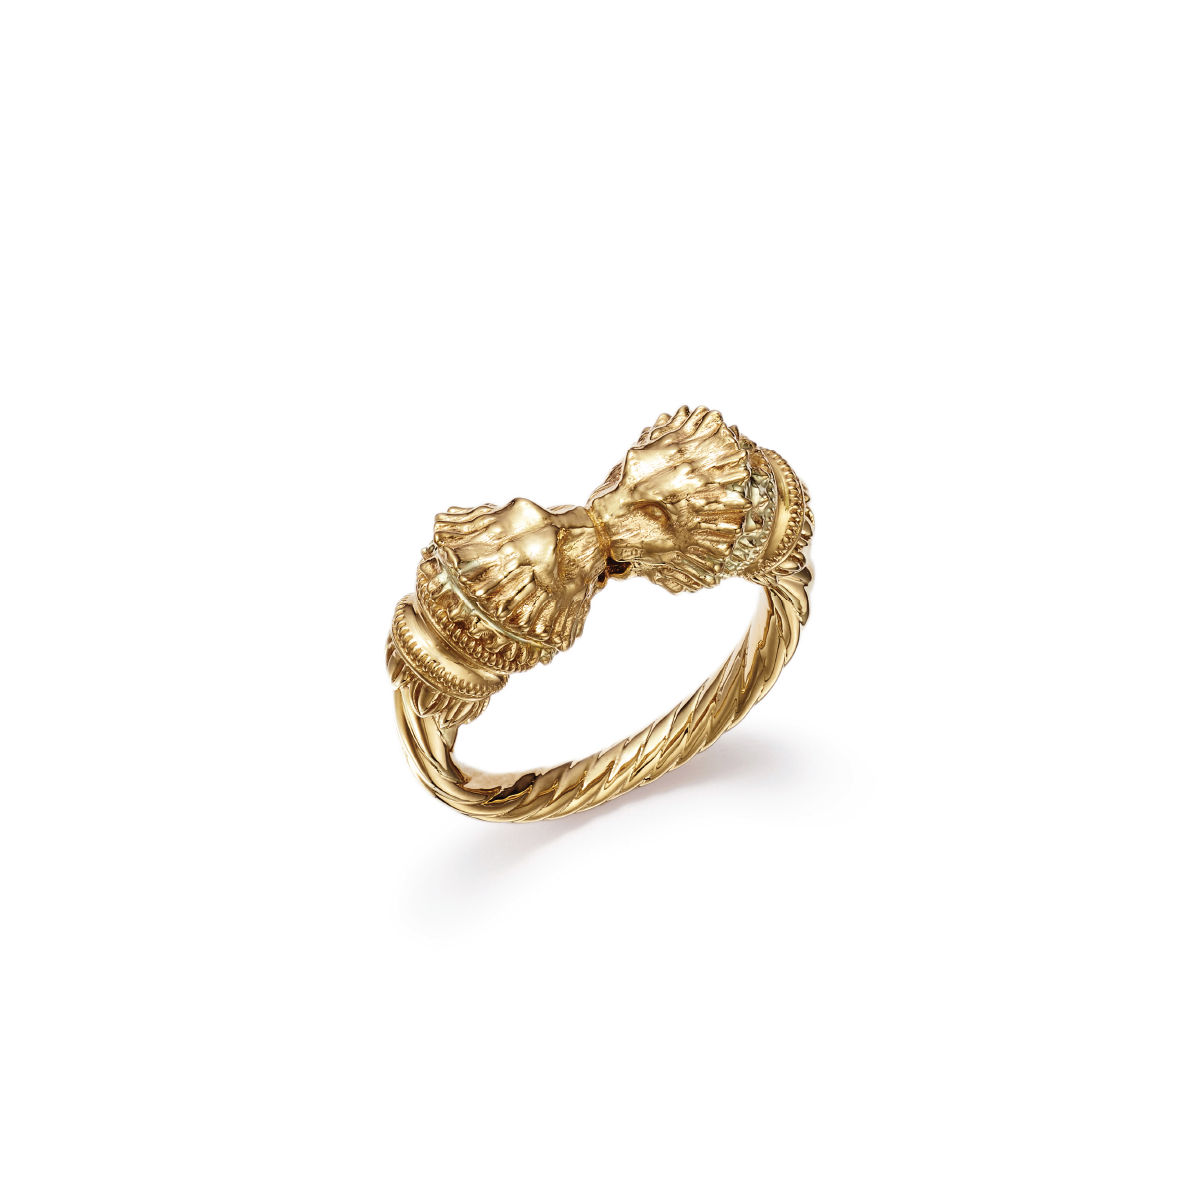 Lion Ring - Sustainable Gold Ring for Man or Woman